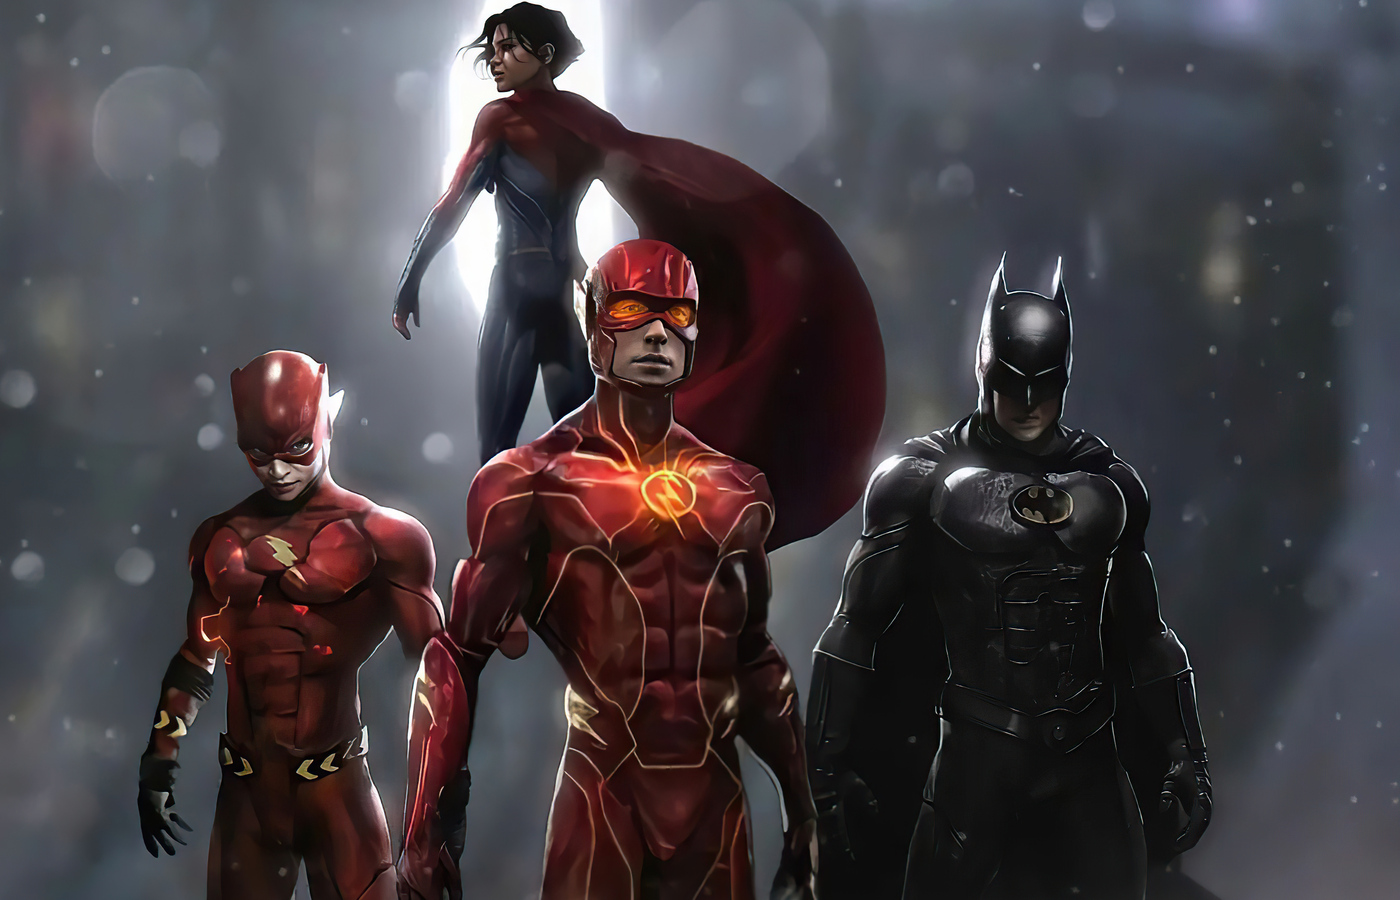 flash-evil-flash-batman-and-supergirl-from-the-flash-movie-p5.jpg